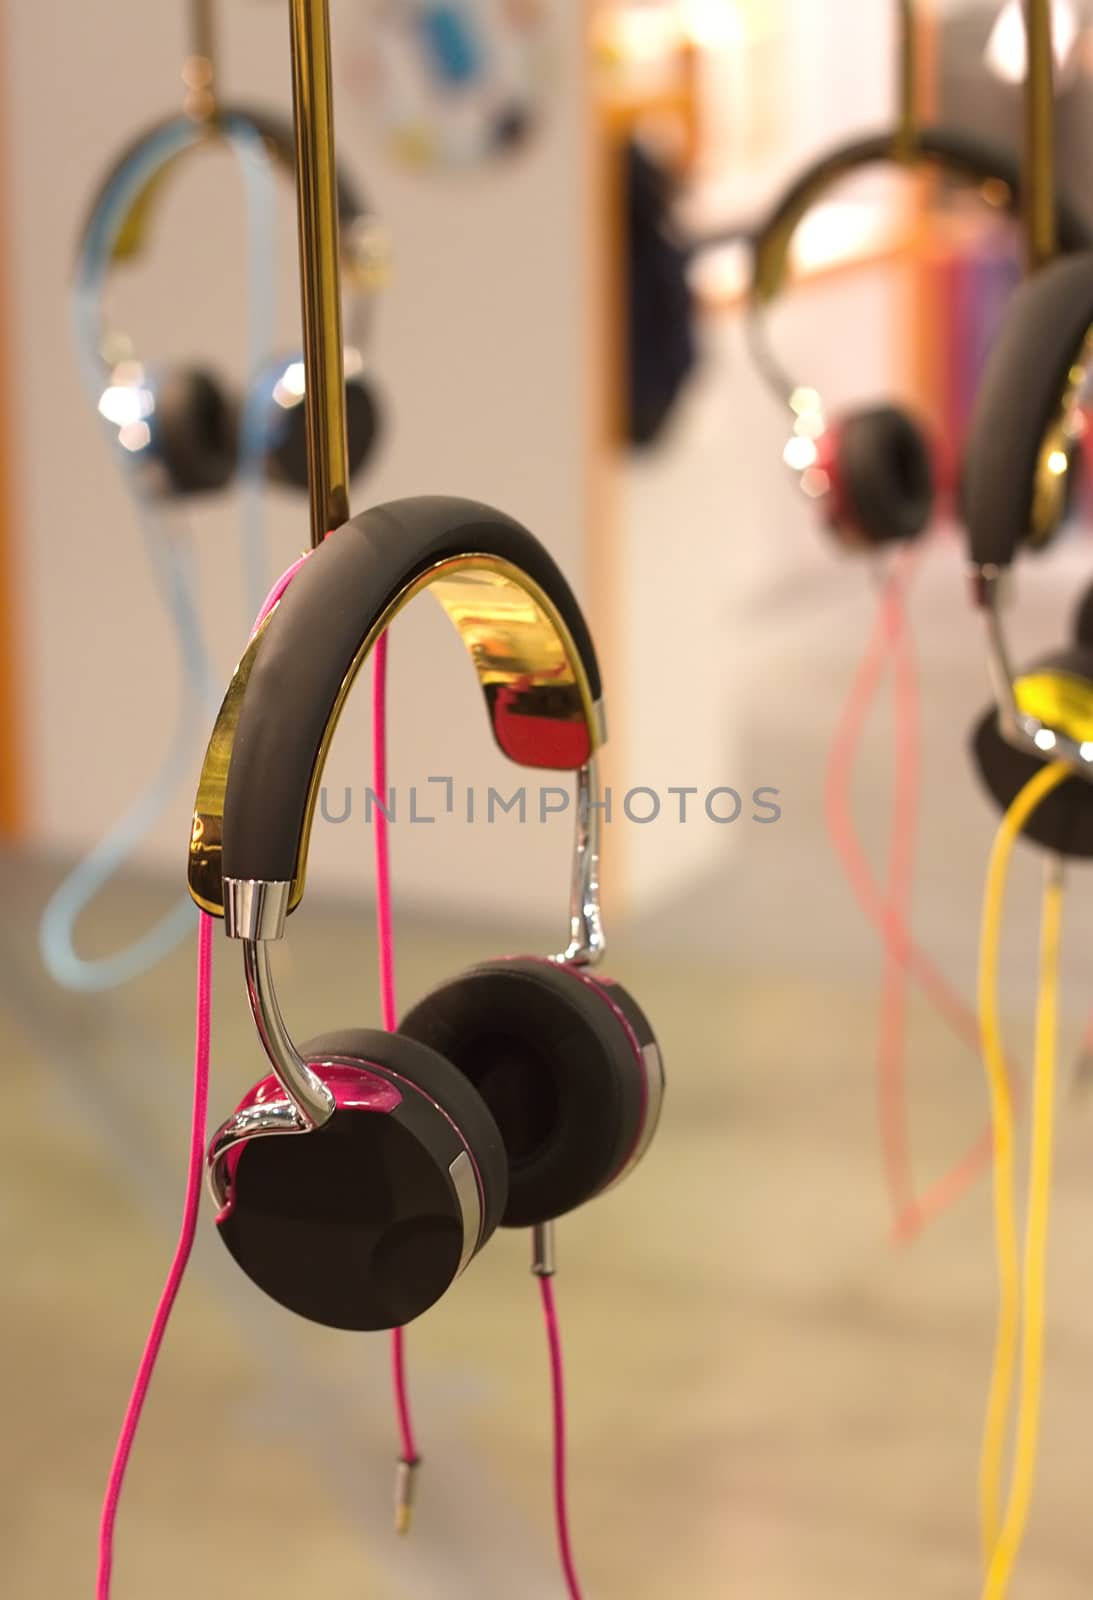 Many color stereo headphones hangs on stand vertical view closeup